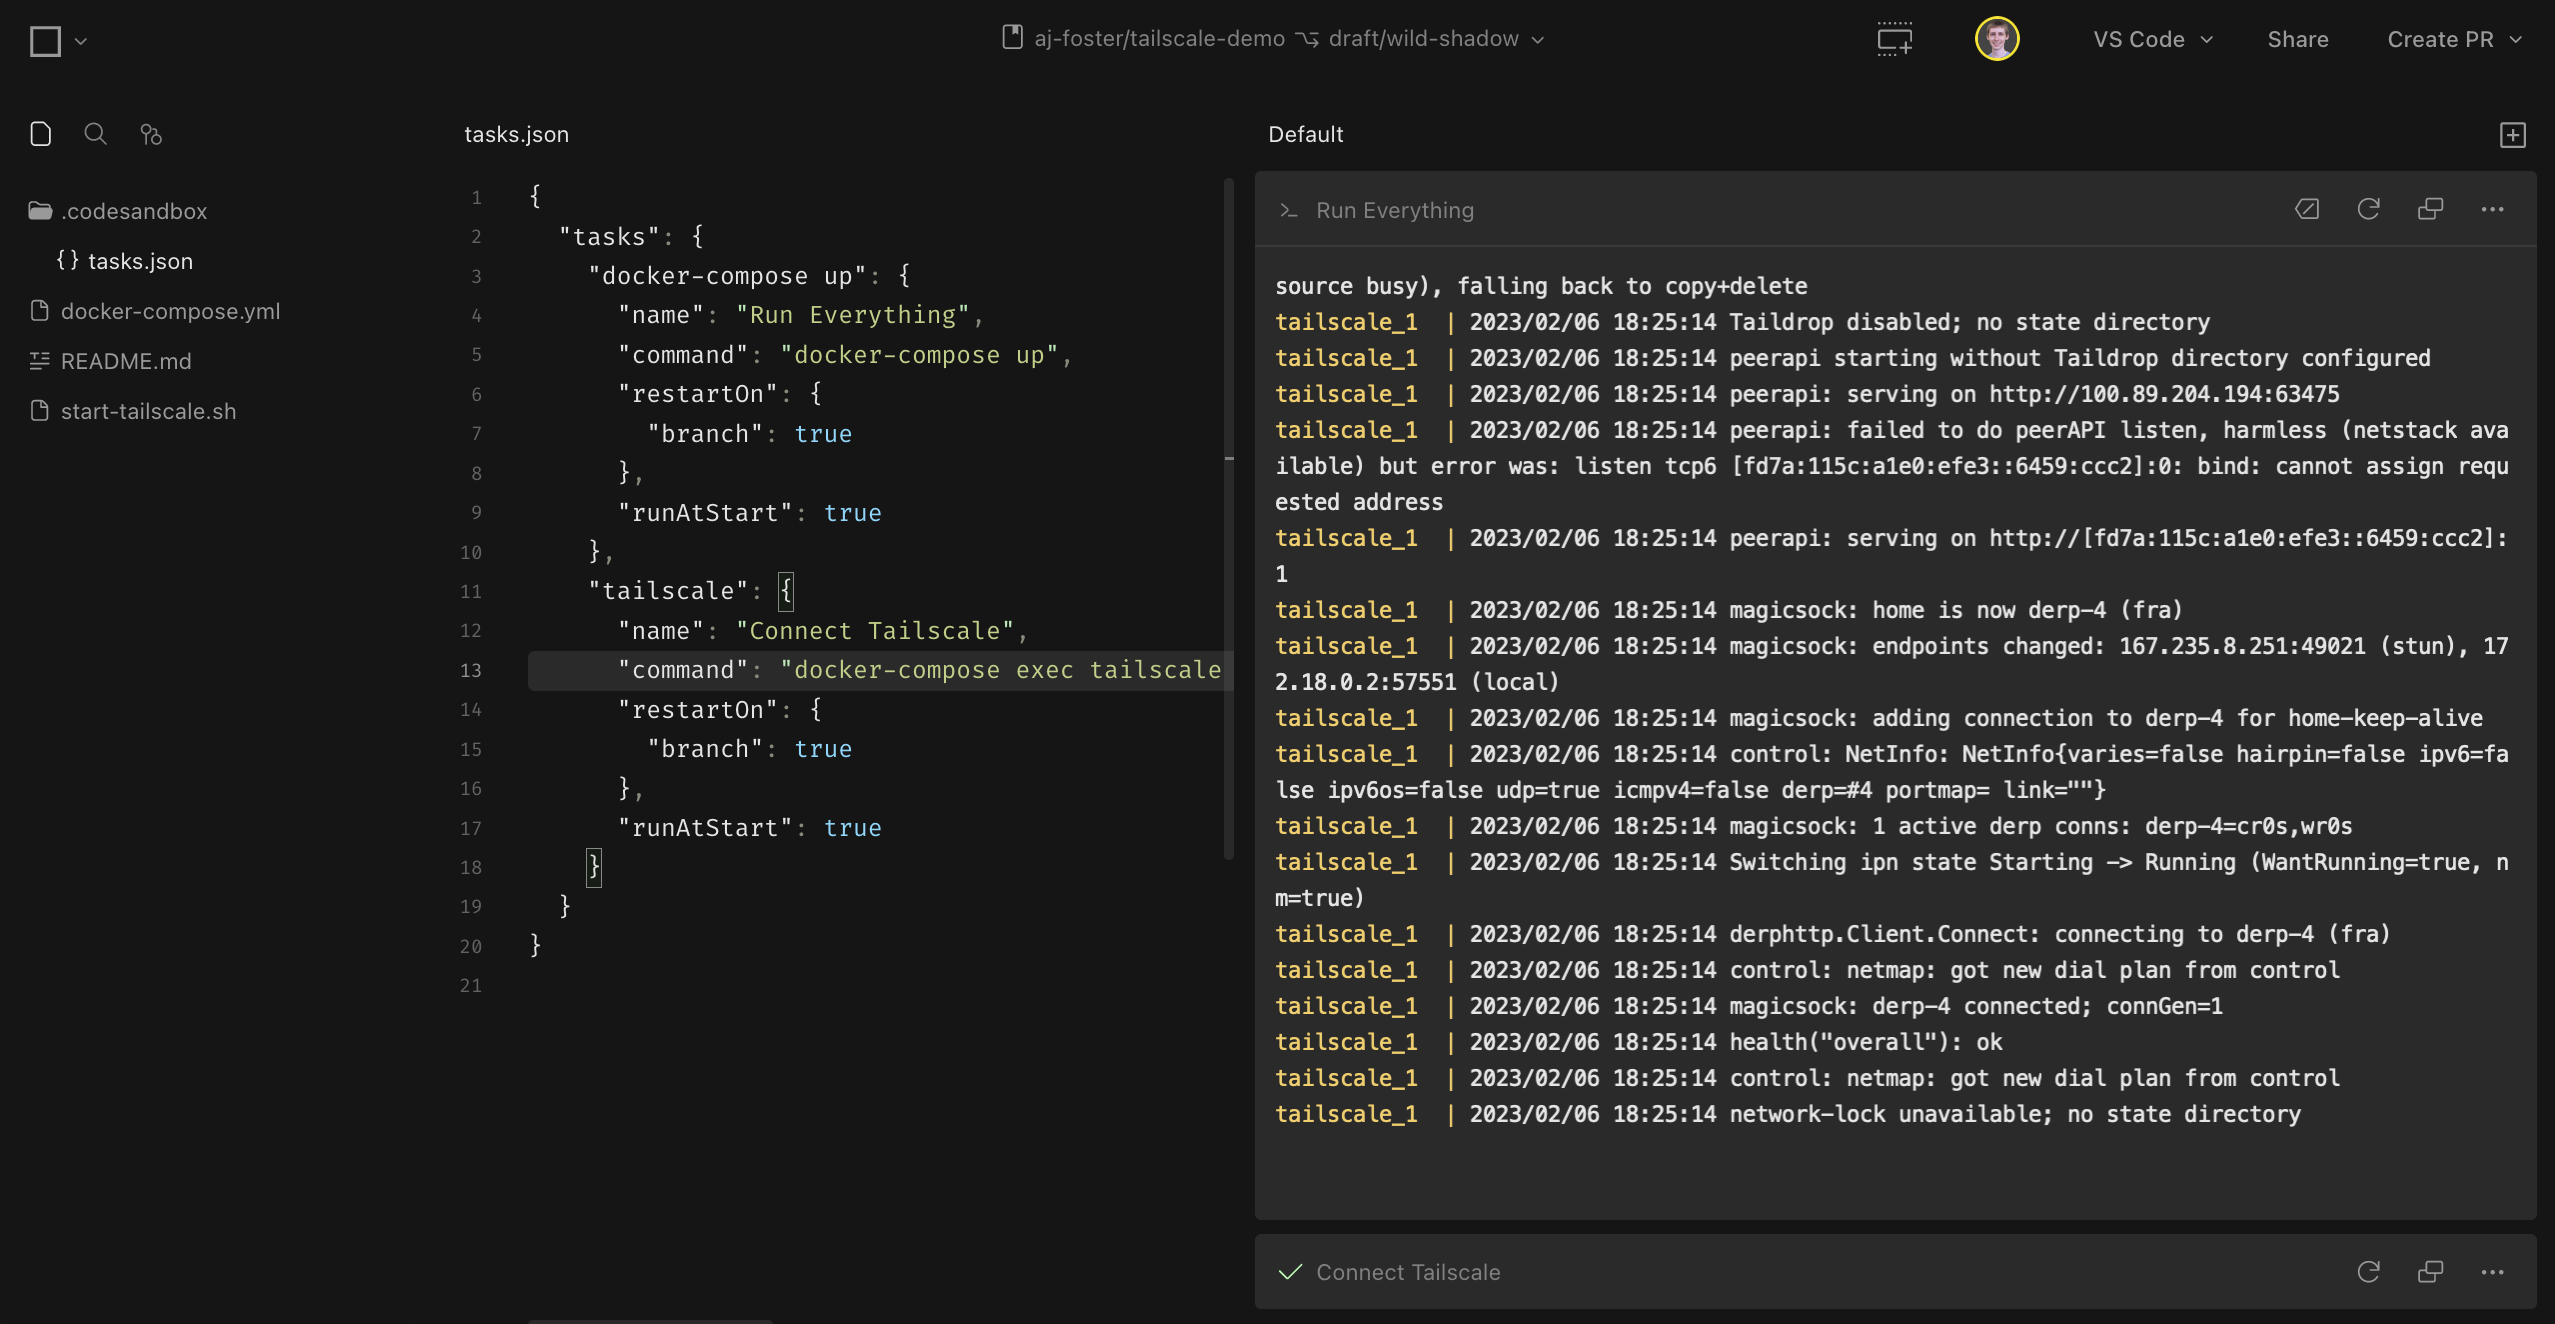 Screenshot of CodeSandbox Repository environment connected to Tailscale.